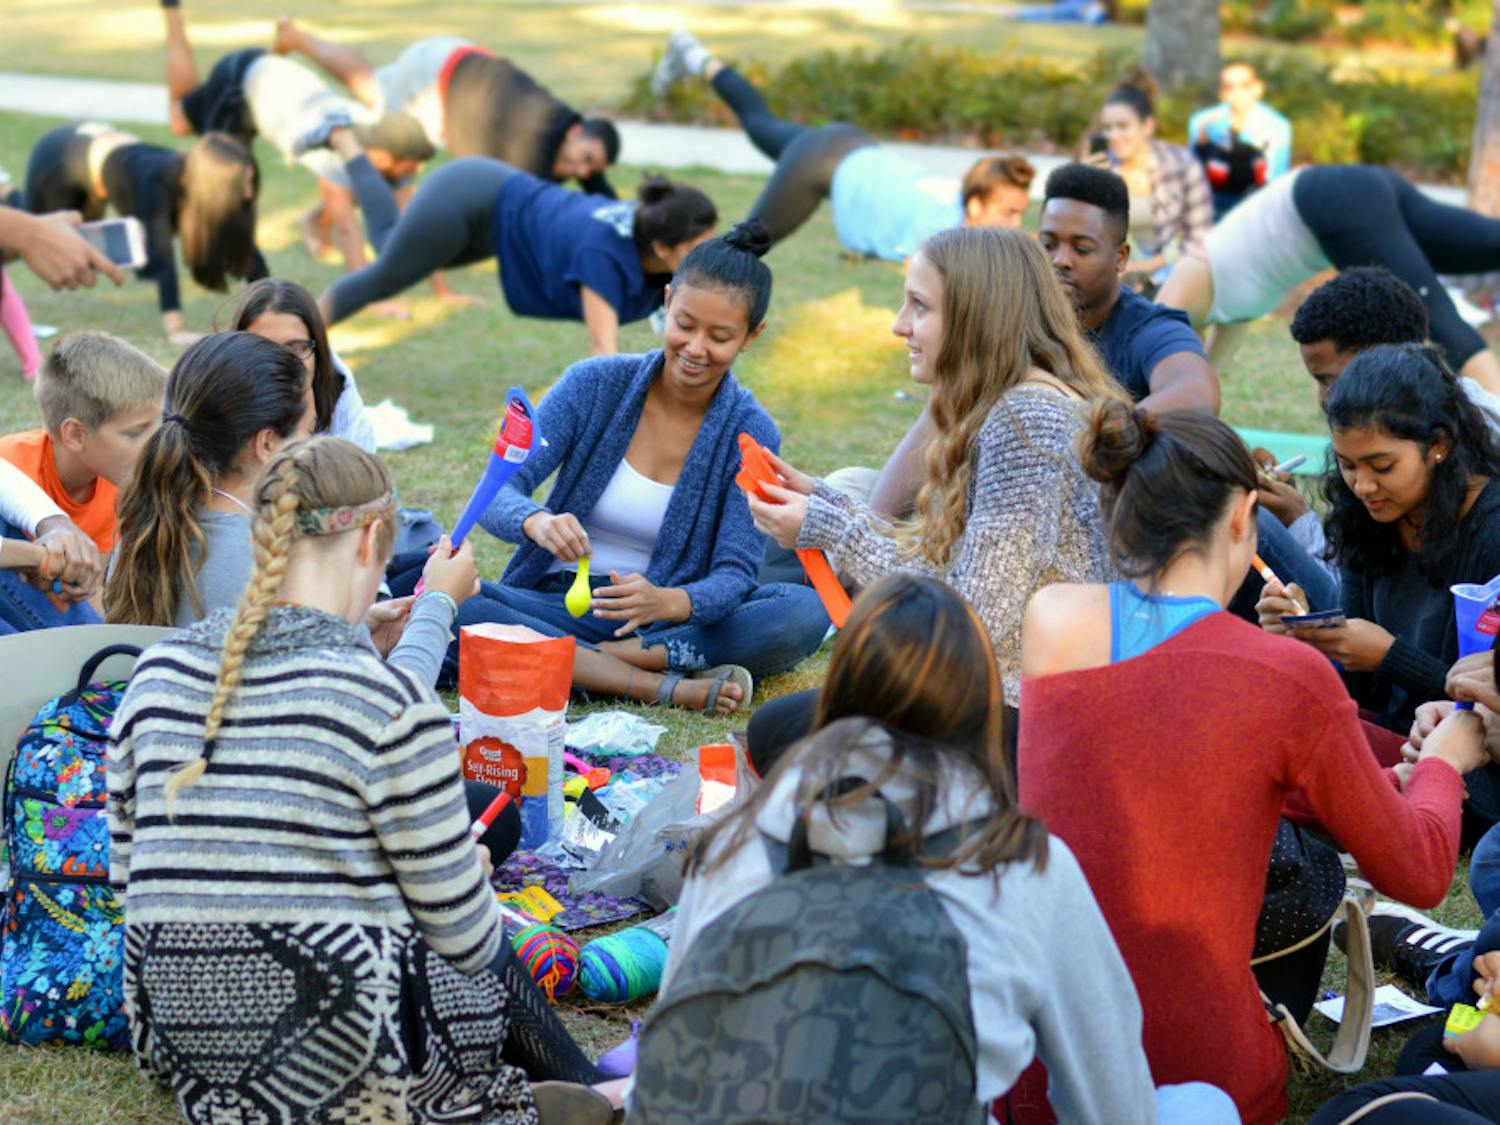 Students gather Thursday to make stress balls and unwind with a yoga session during the Member Leadership Program’s “Chomp the Stress” event on the Plaza of the Americas. Students were given free pizza, yoga and crafts to help them relax before final exams.